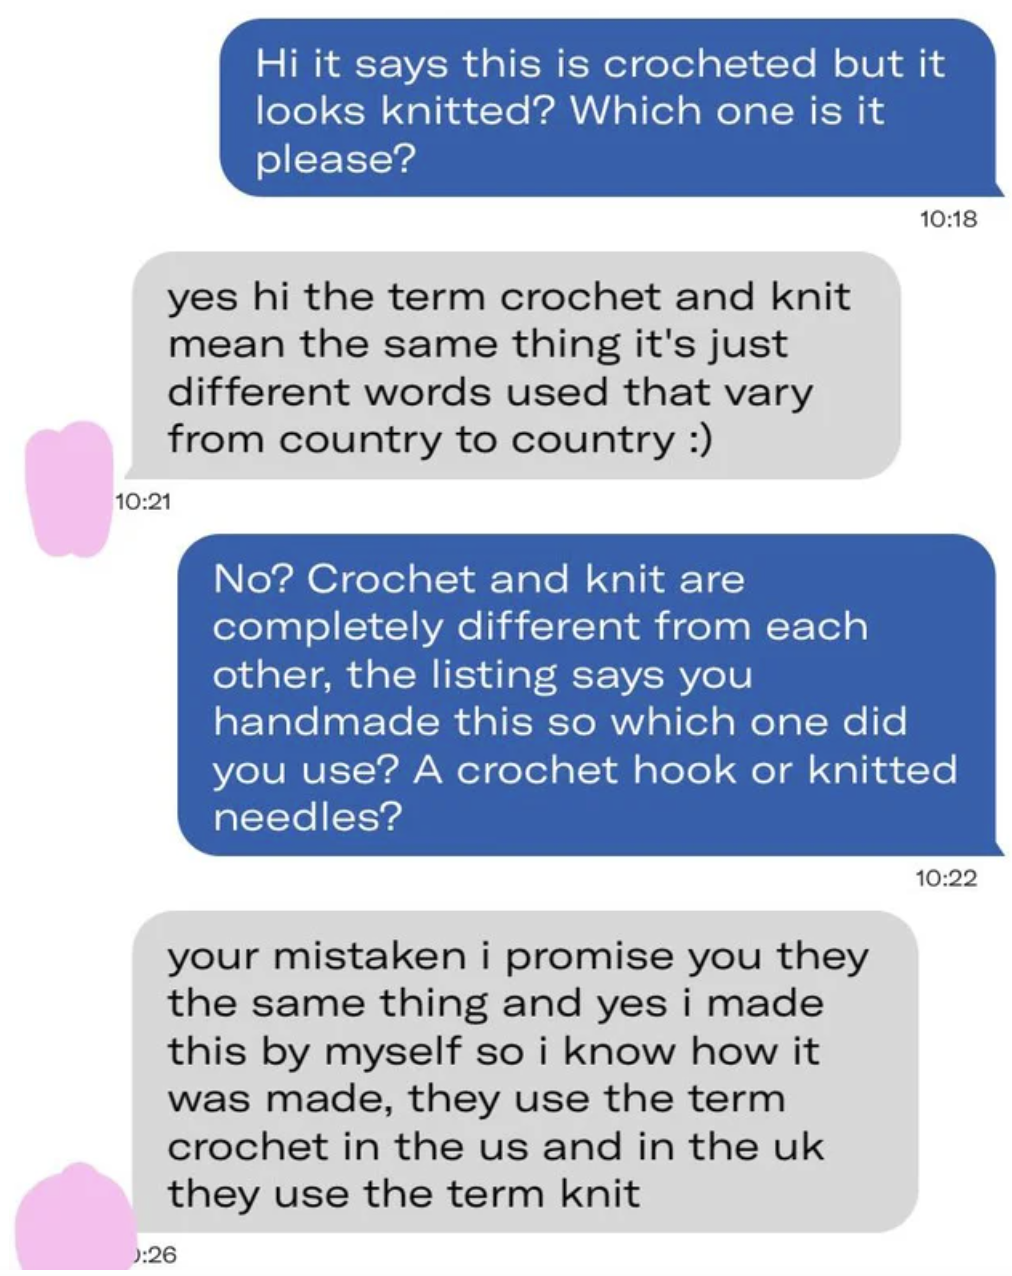 Confidently Incorrect - number - yes hi the term crochet and knit mean the same thing it's just different words used that vary from country to country Hi it says this is crocheted but it looks knitted? Which one is it please? your mistaken i promise you t